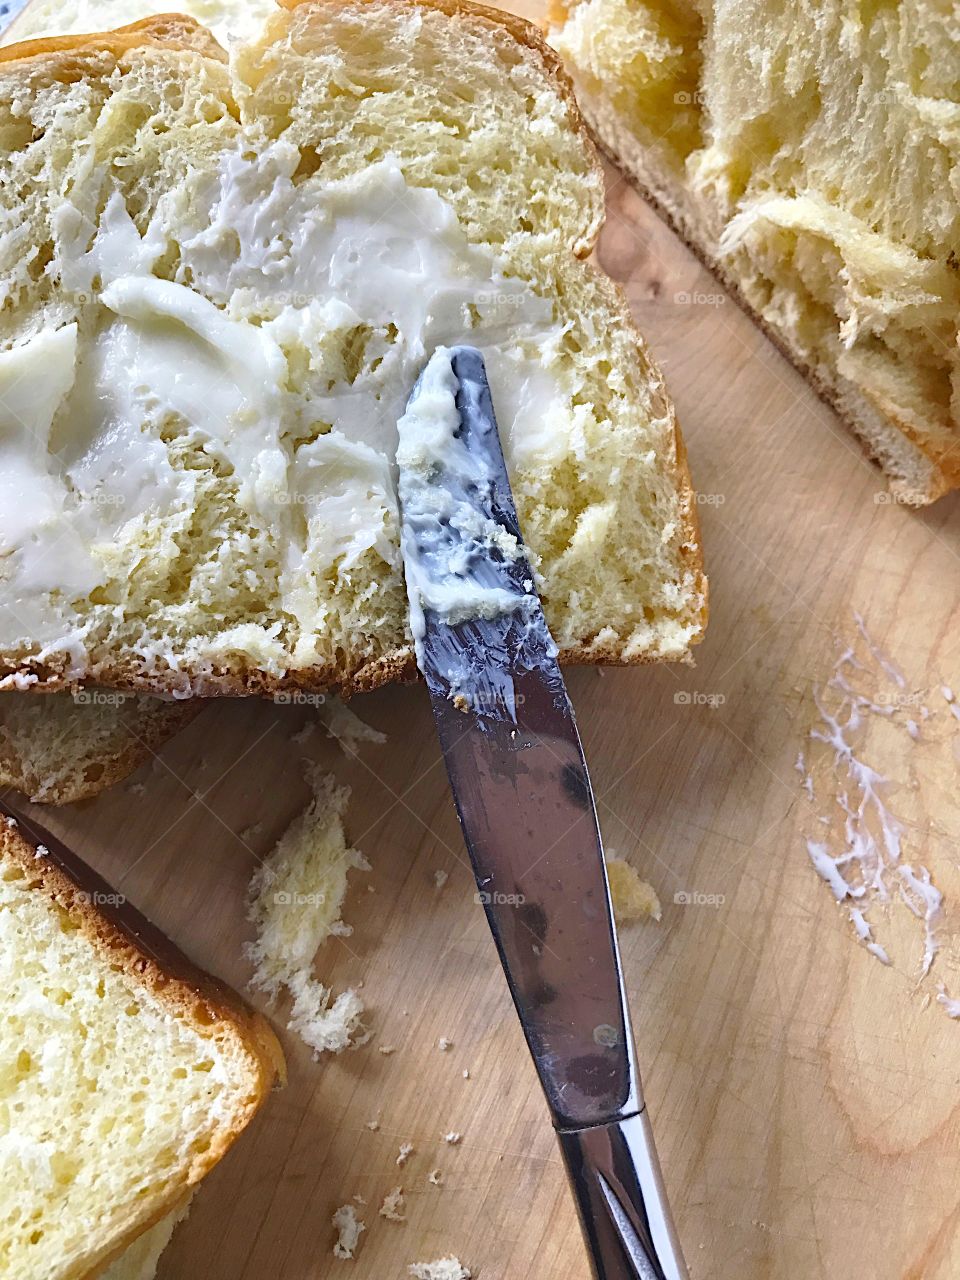 Buttering bread with copy space